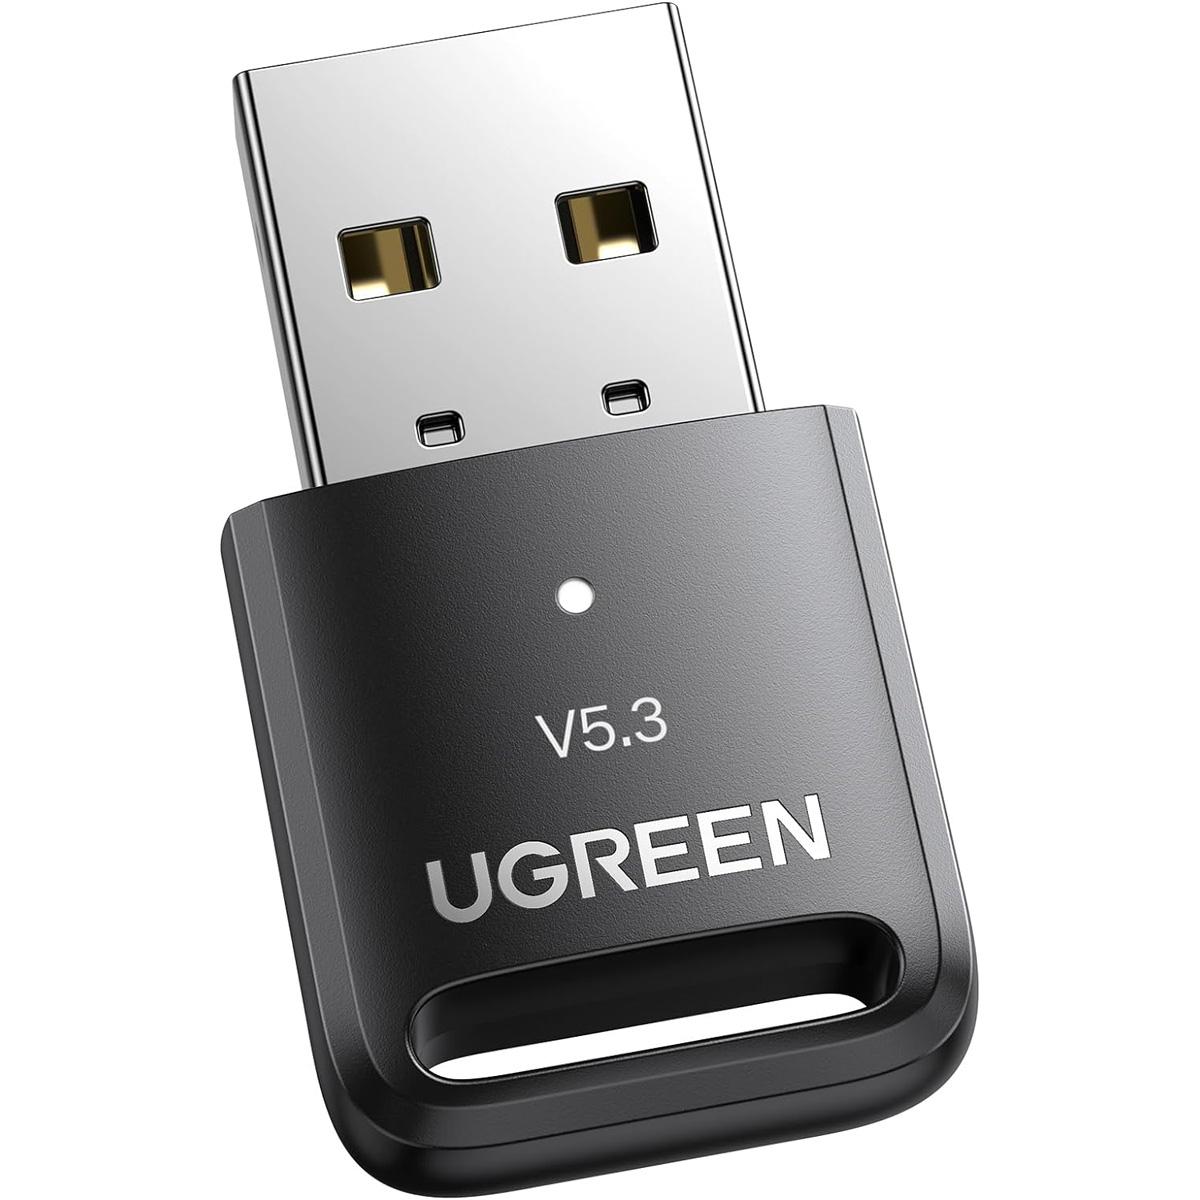 UGreen Bluetooth 5.3 Adapter USB Dongle for $6.92 Shipped